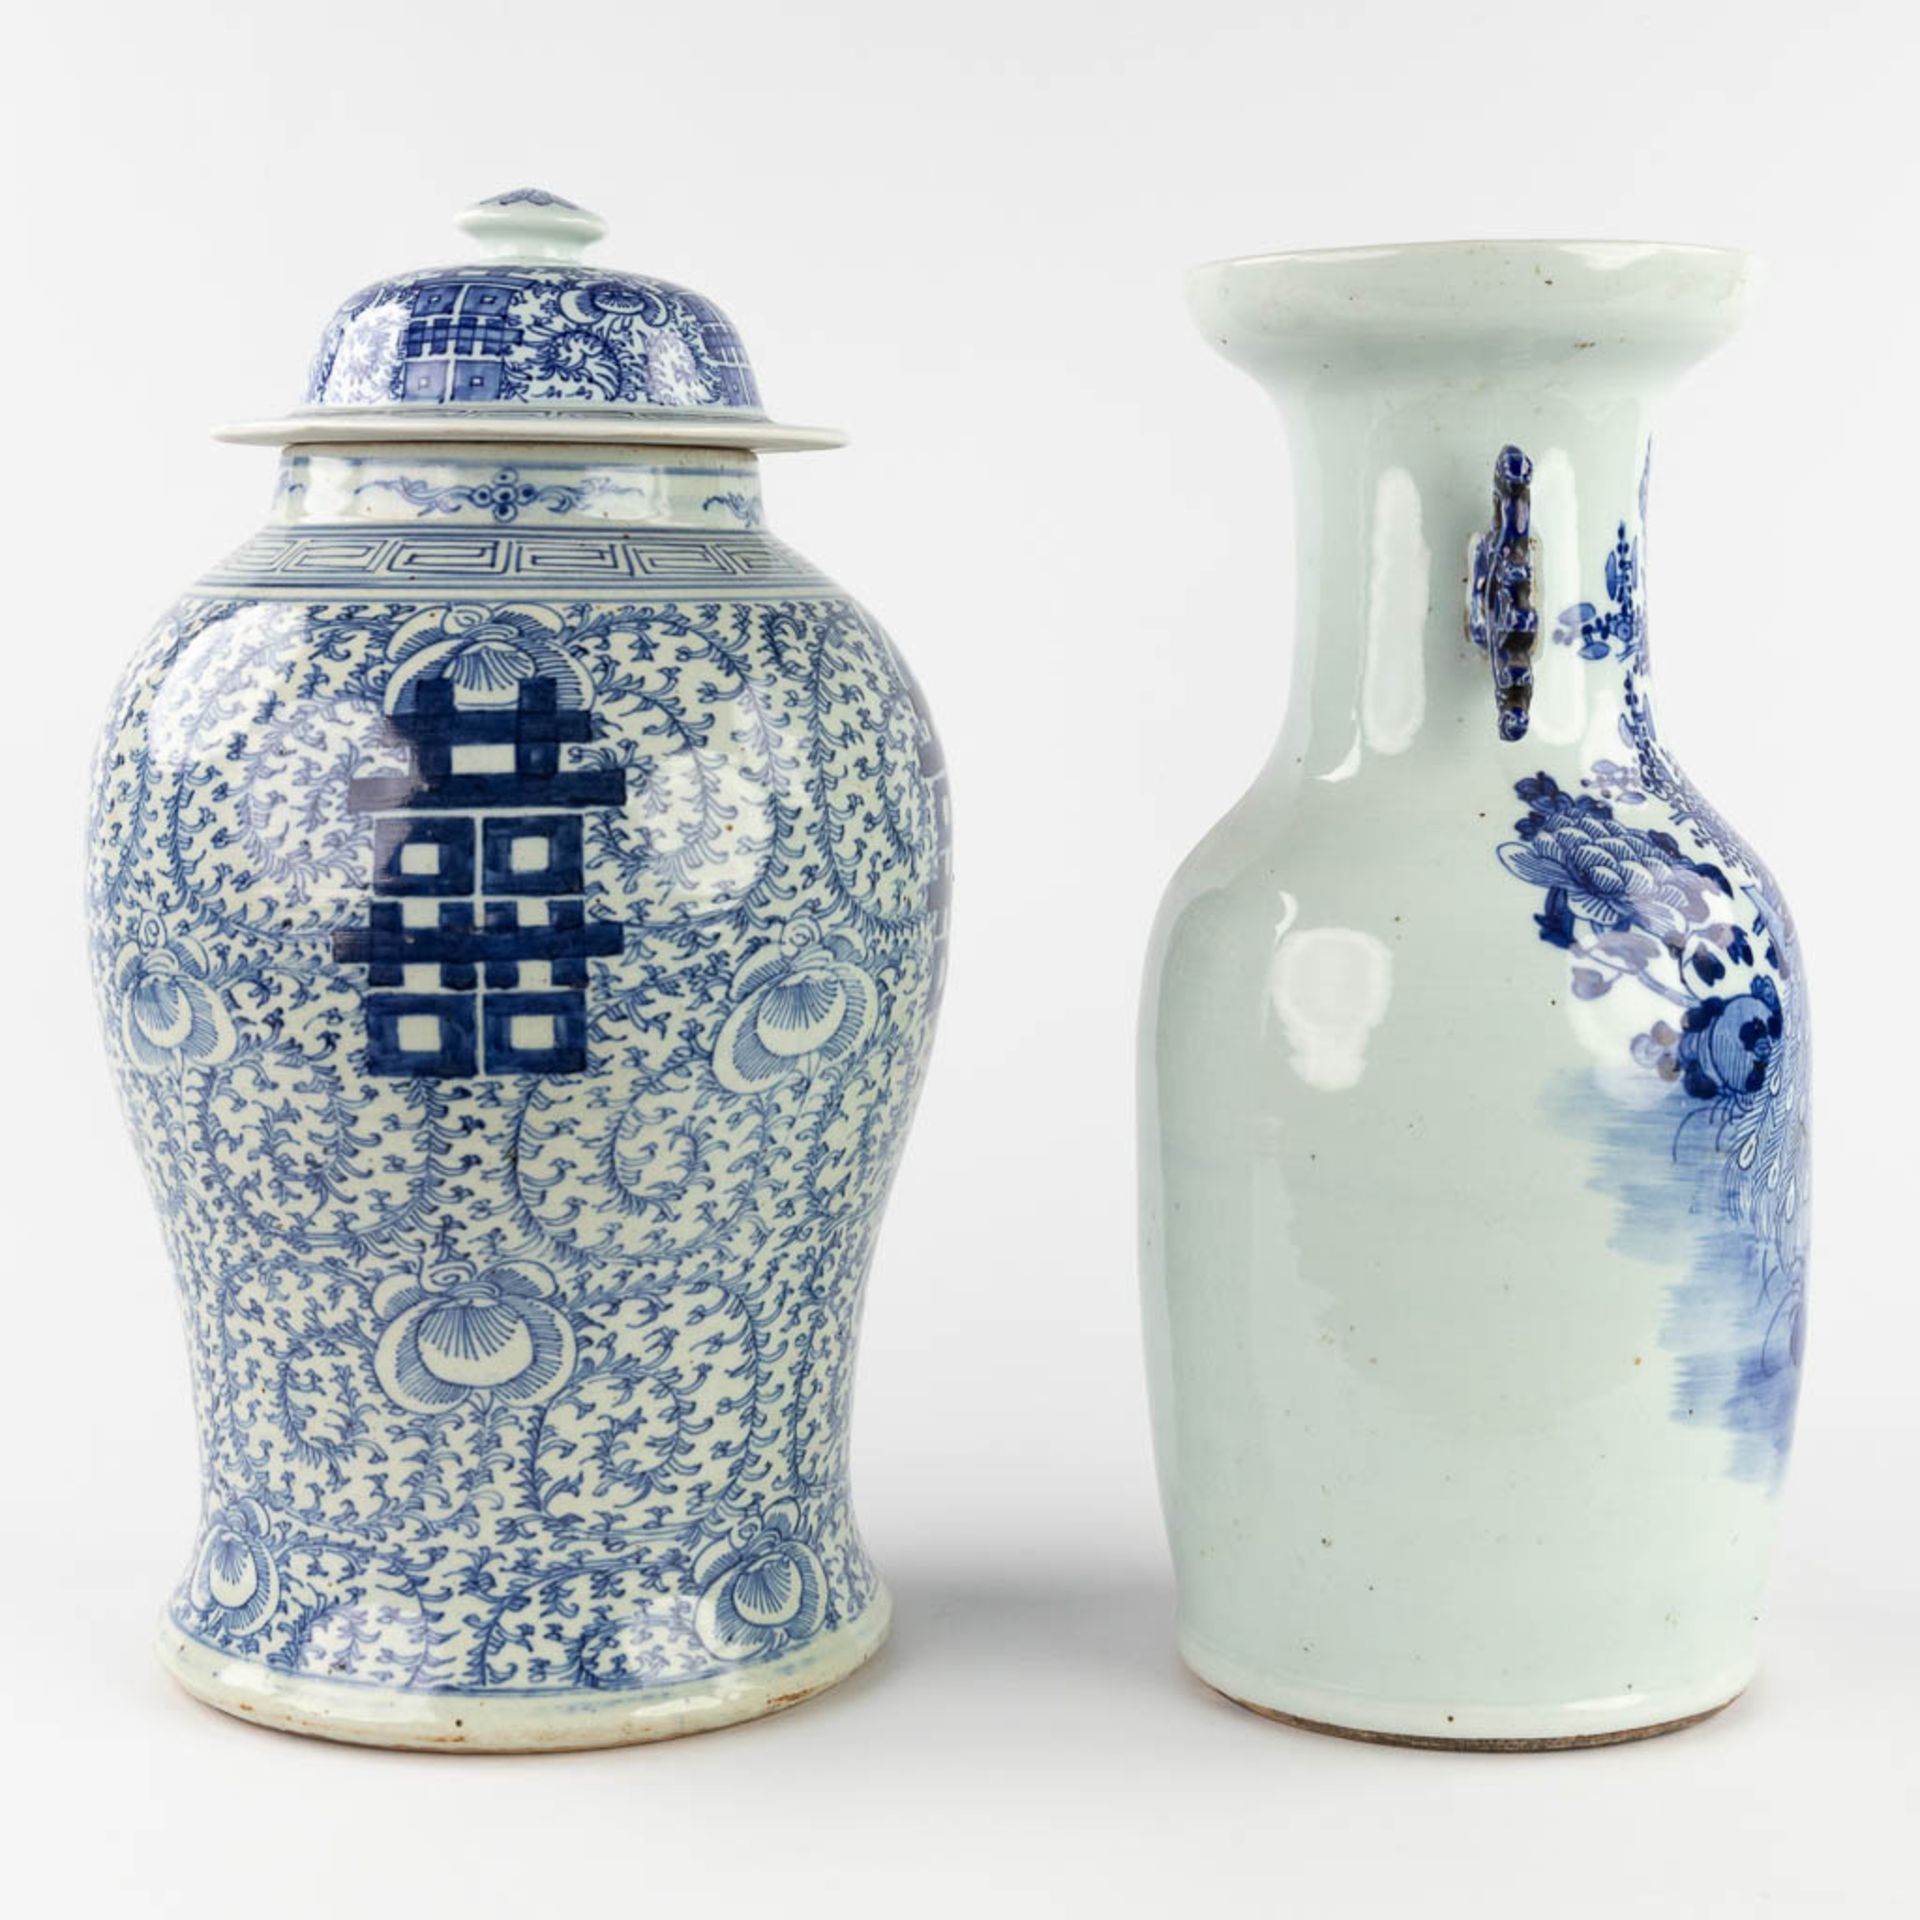 Two Chinese vases, of which one with a lid. Blue-white decor. 19th/20th C. (H:45 x D:25 cm) - Image 4 of 13